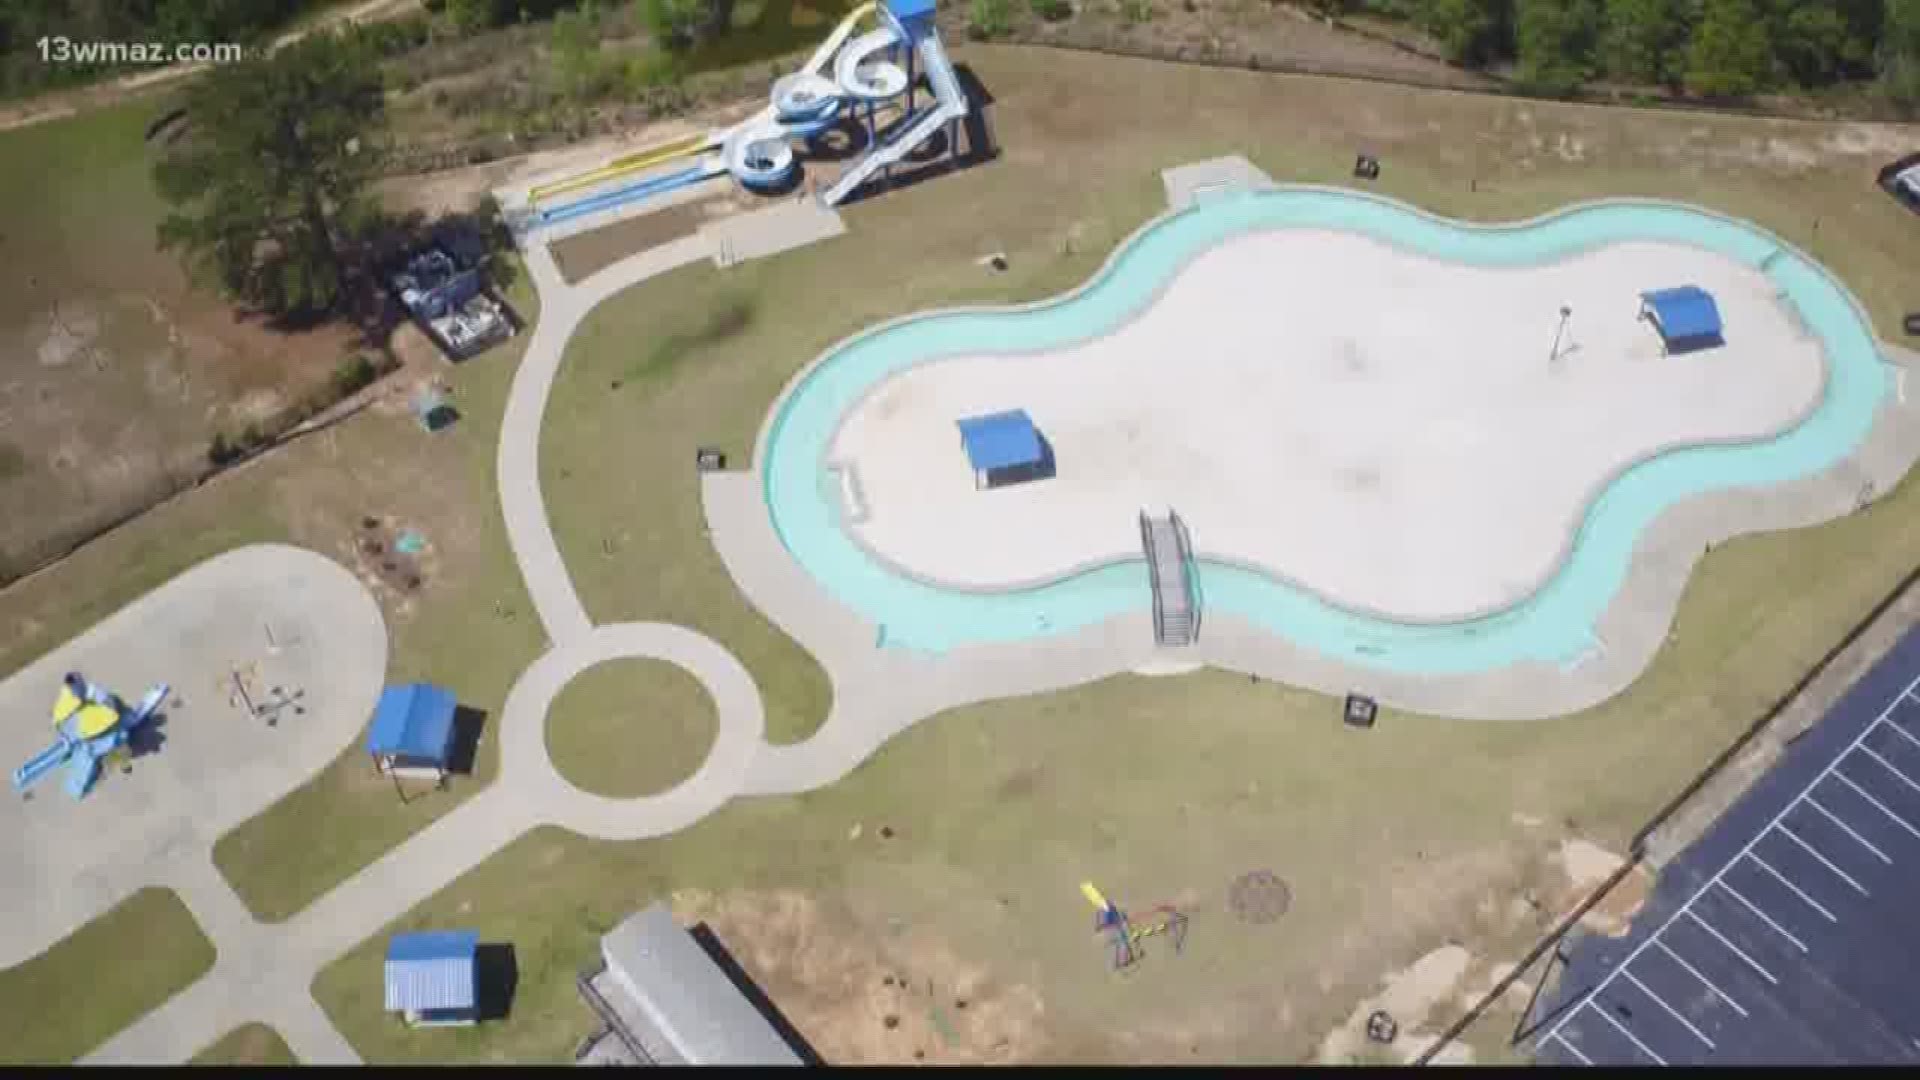 There are still a few weeks left of summer break, and the Sandy Beach Water Park still hasn't opened its doors for families to cool off in the heat.